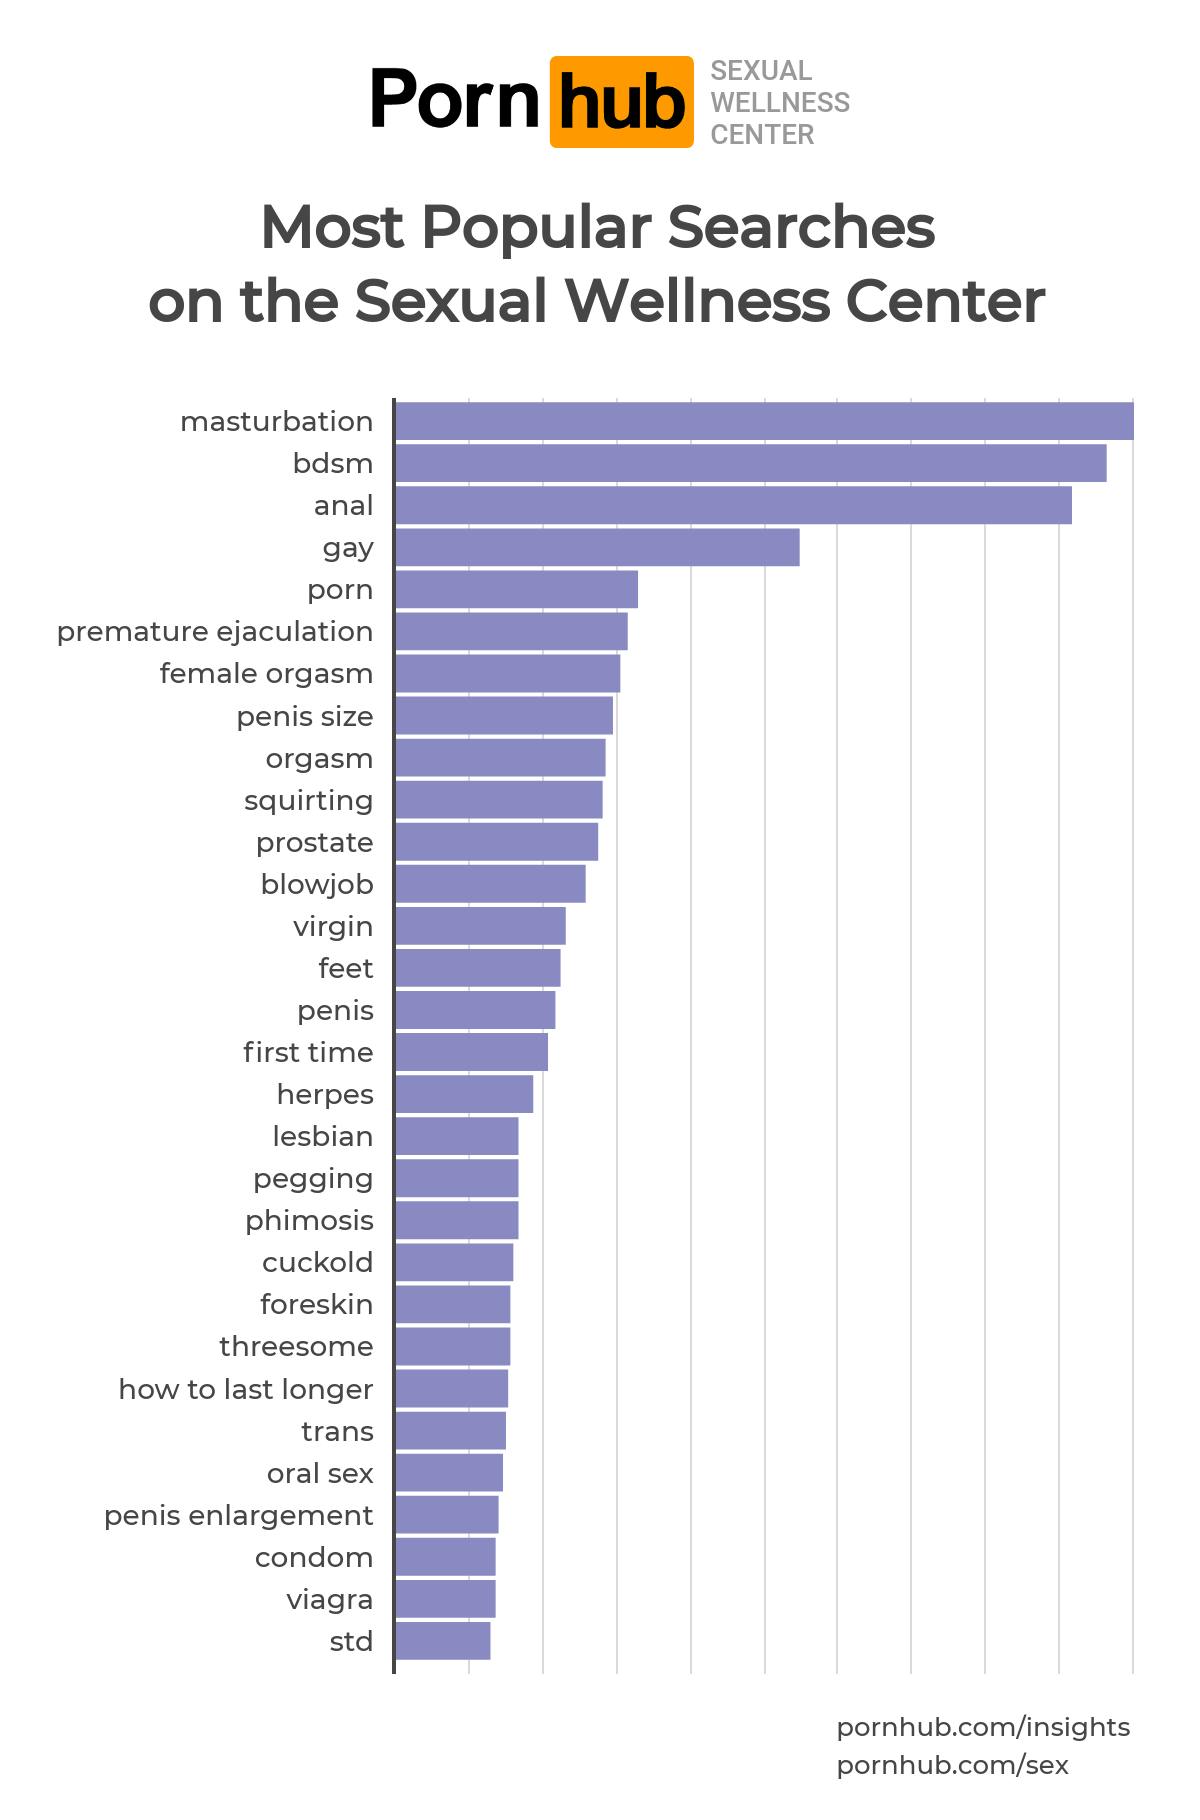 https://imgix.seoghoer.dk/pornhub-insights-sexual-wellness-center-top-searches.png